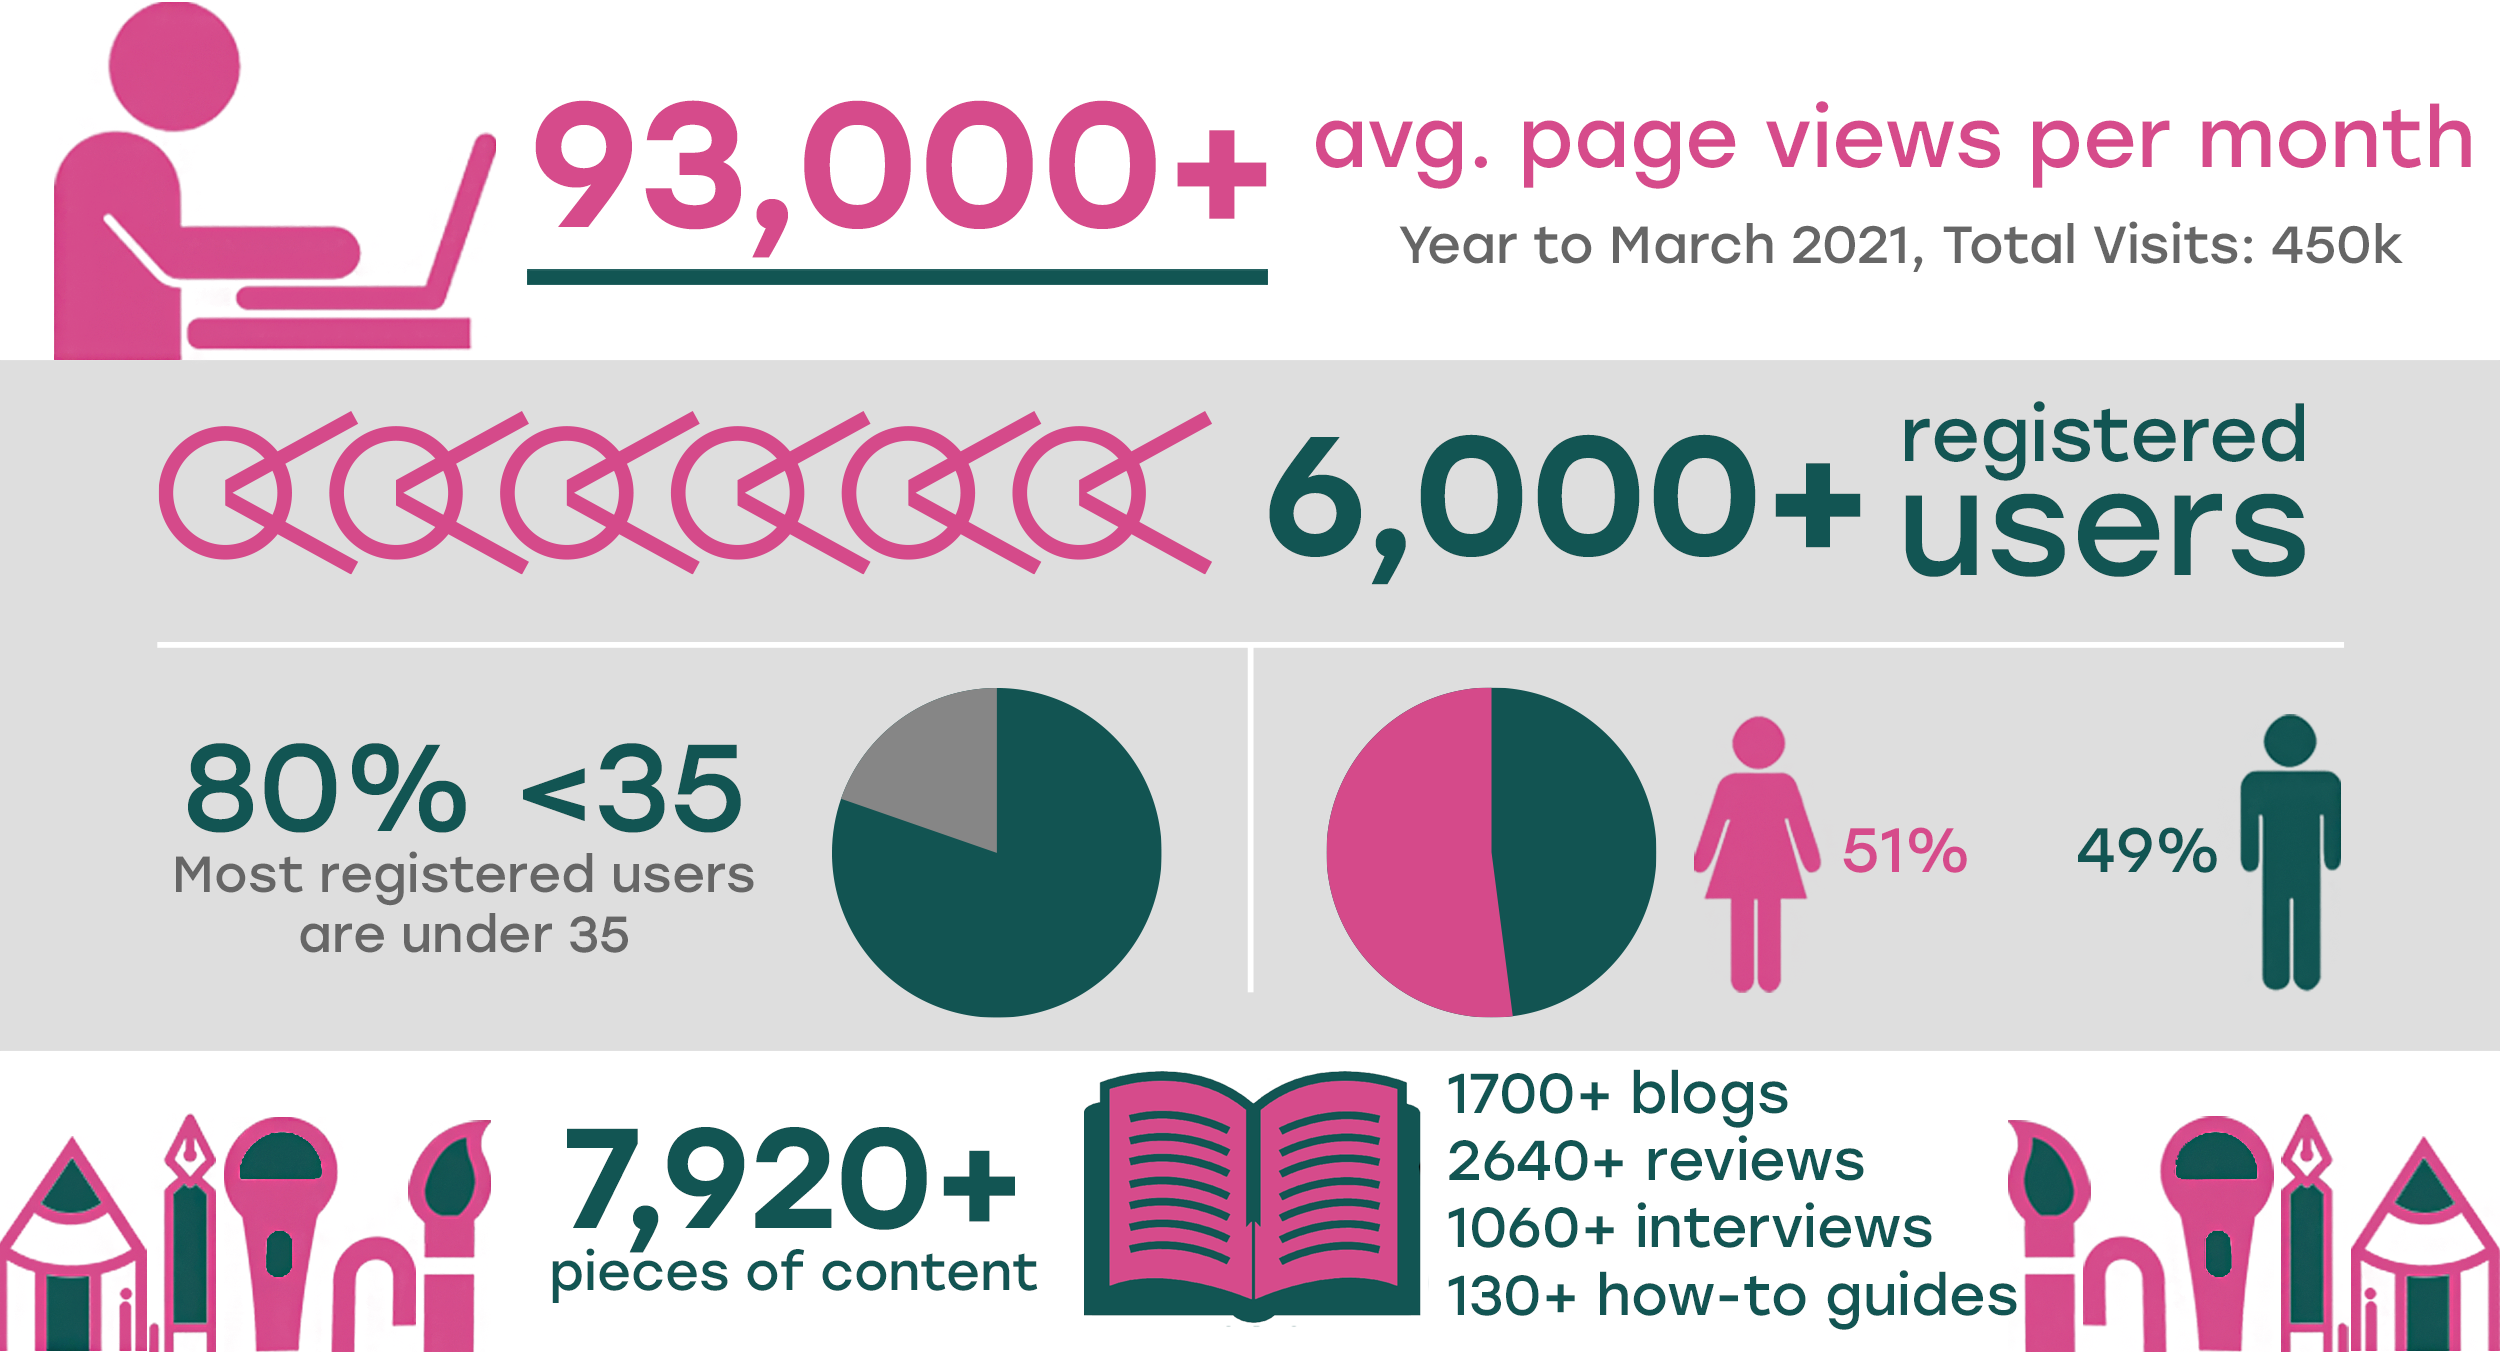 67000+ page views per month and 450k visits achieved in 2020-21